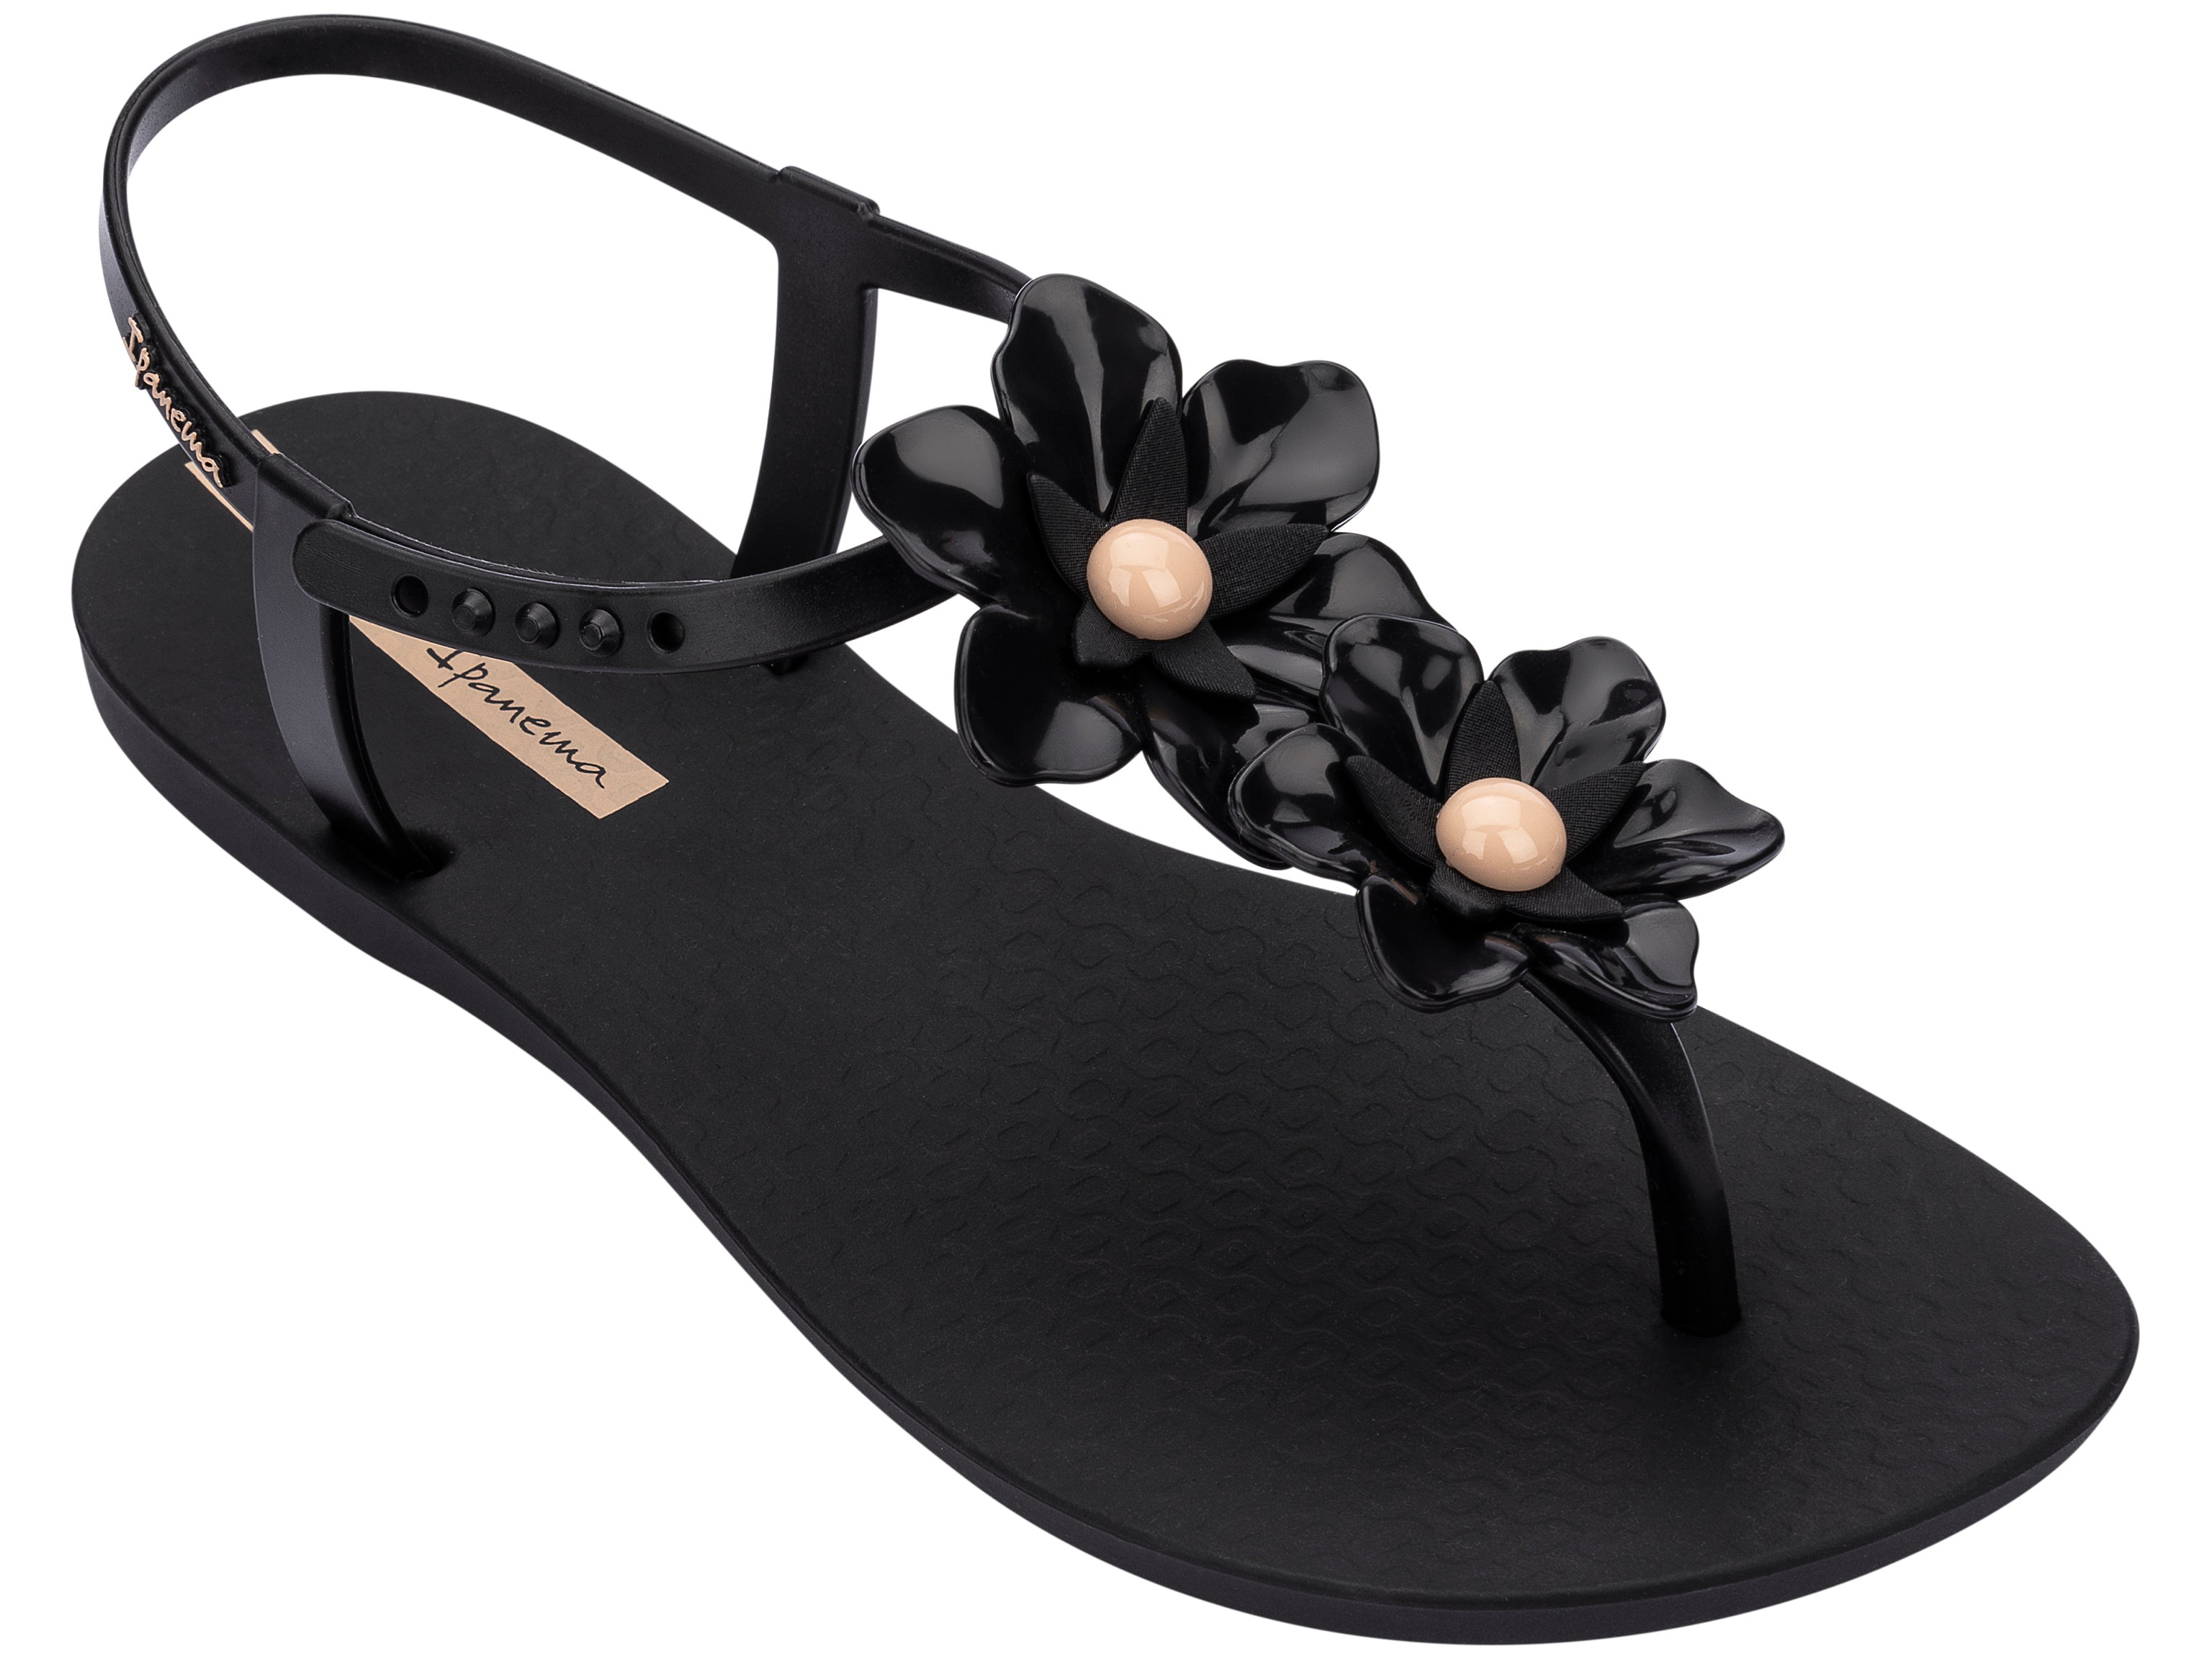 Angled view of a black Ipanema Duo Flowers women's t-strap sandal with two flowers.